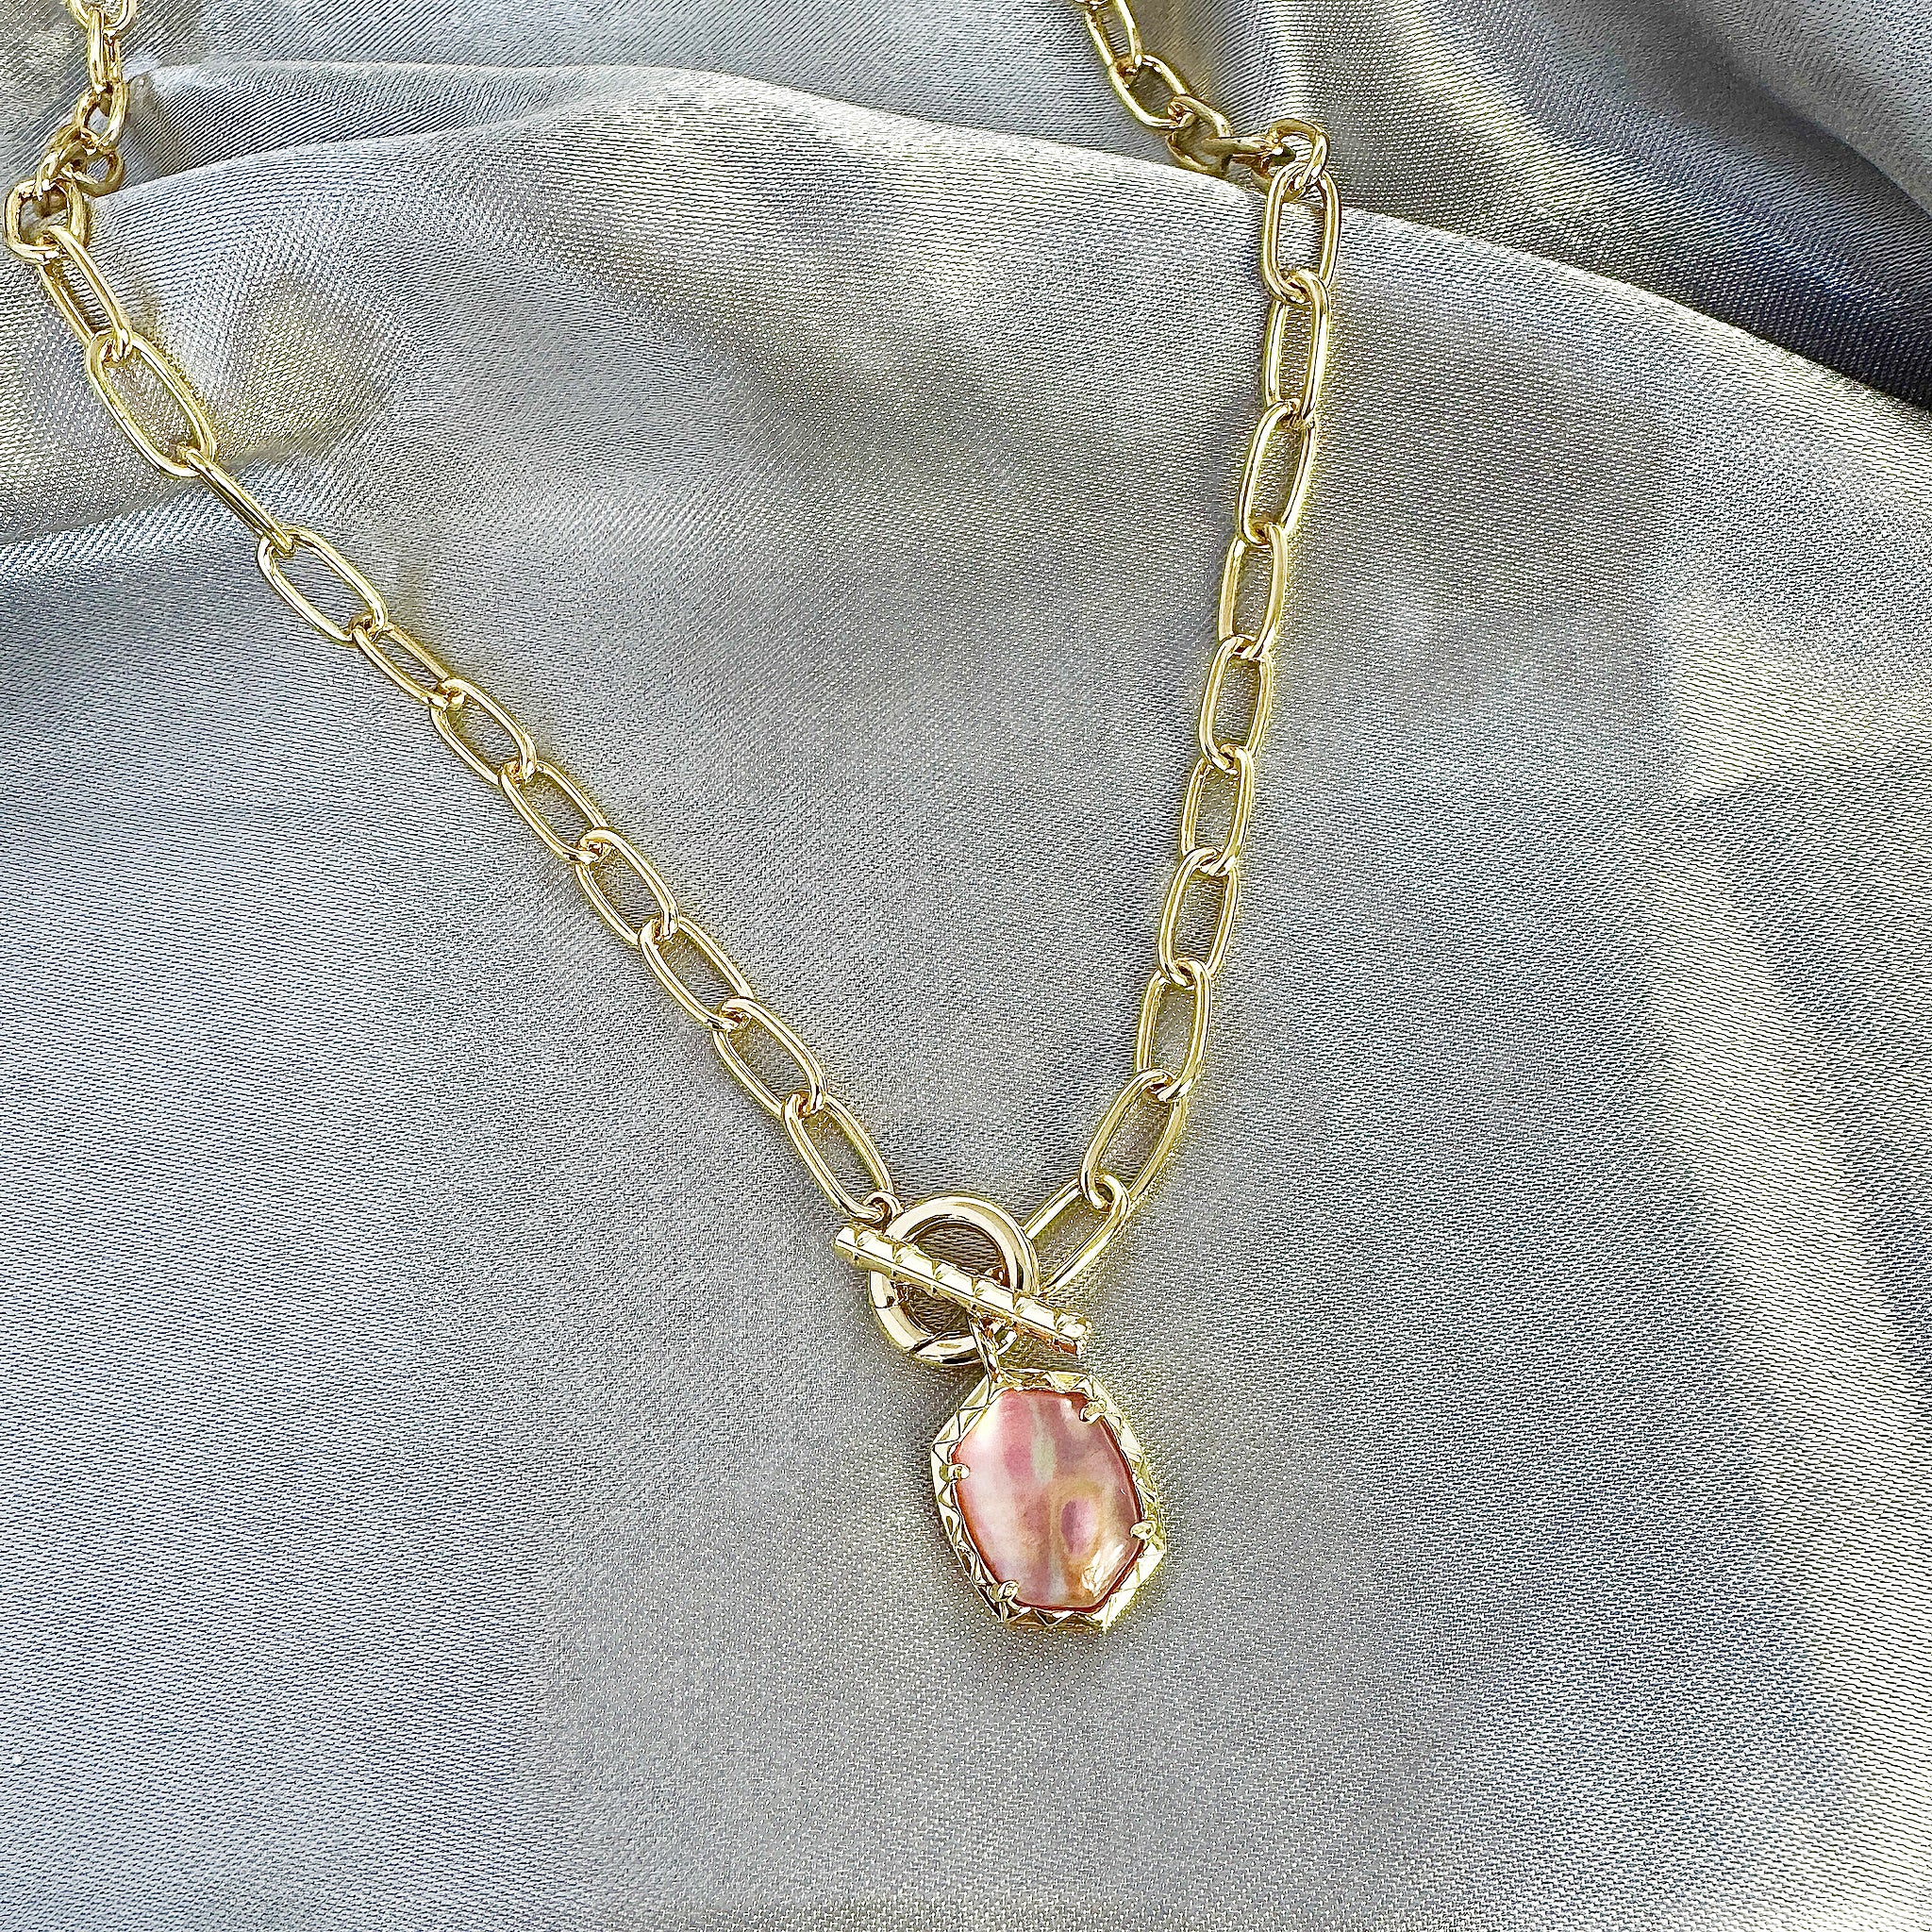 Kendra Scott Daphne Chain Link Pendant Necklace in Light Pink Iridescent Abalone and Gold